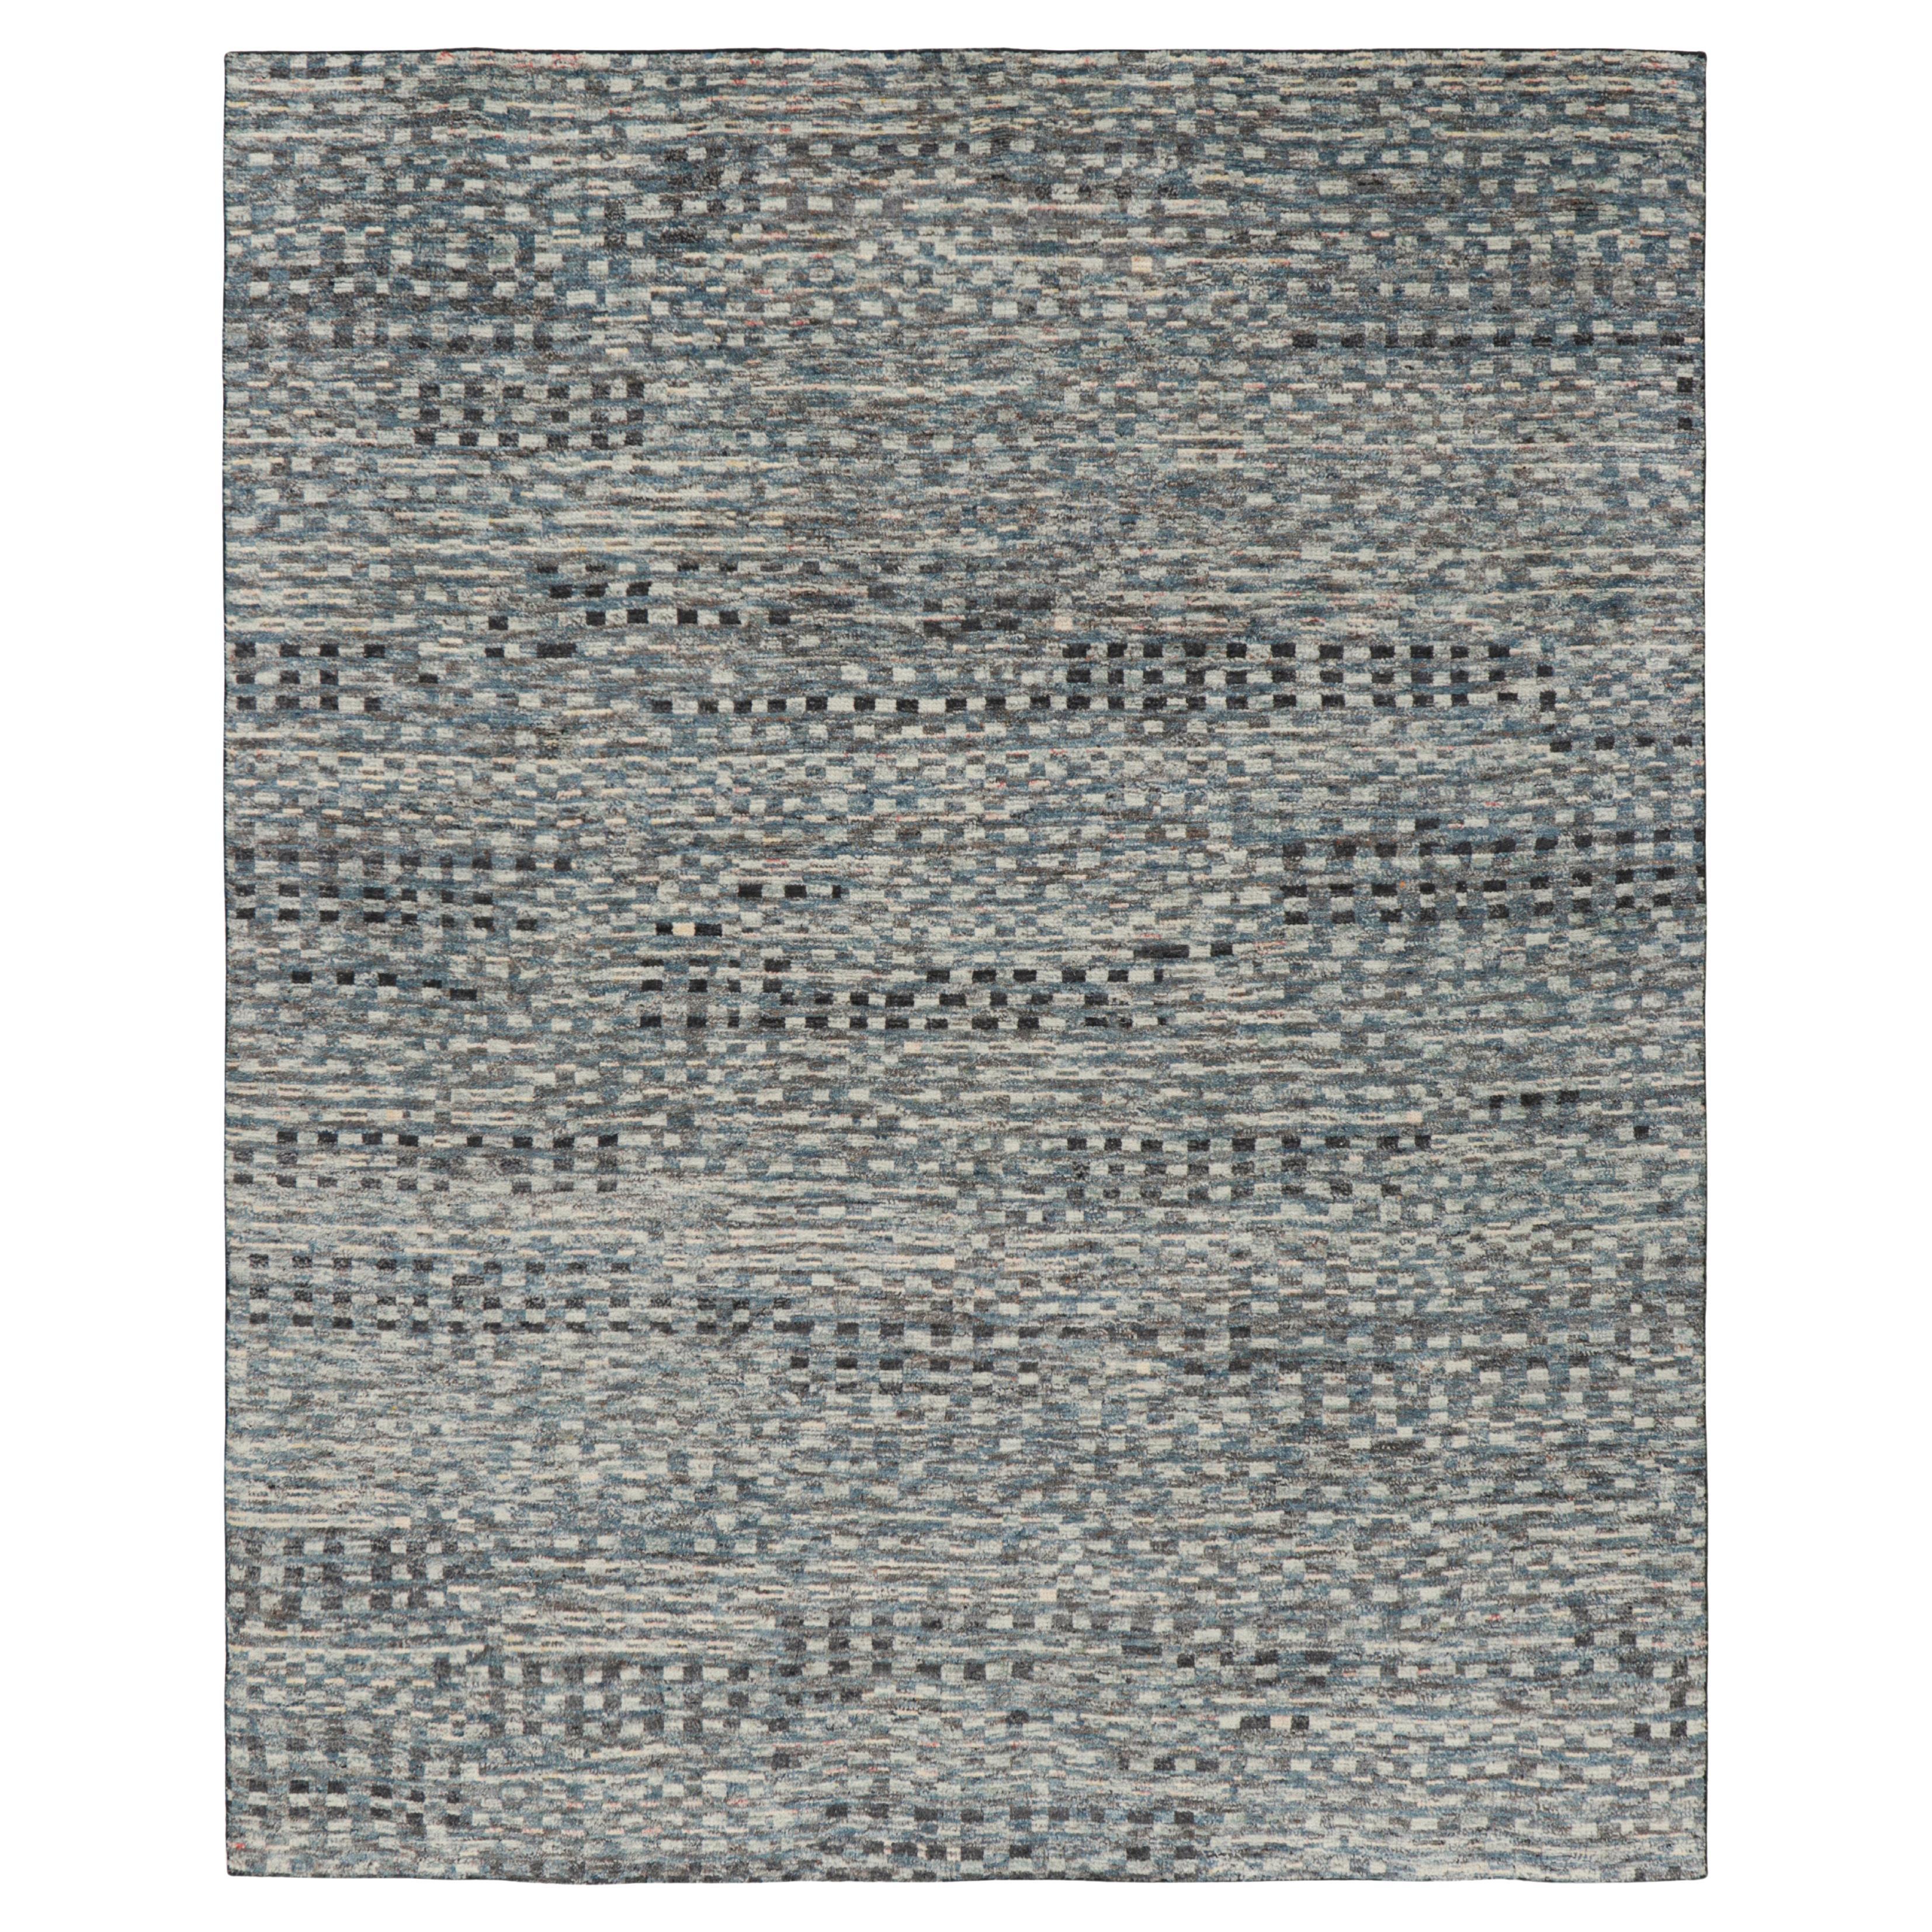 Rug & Kilim’s Moroccan Style Rug in Blue, Gray and White Geometric Patterns